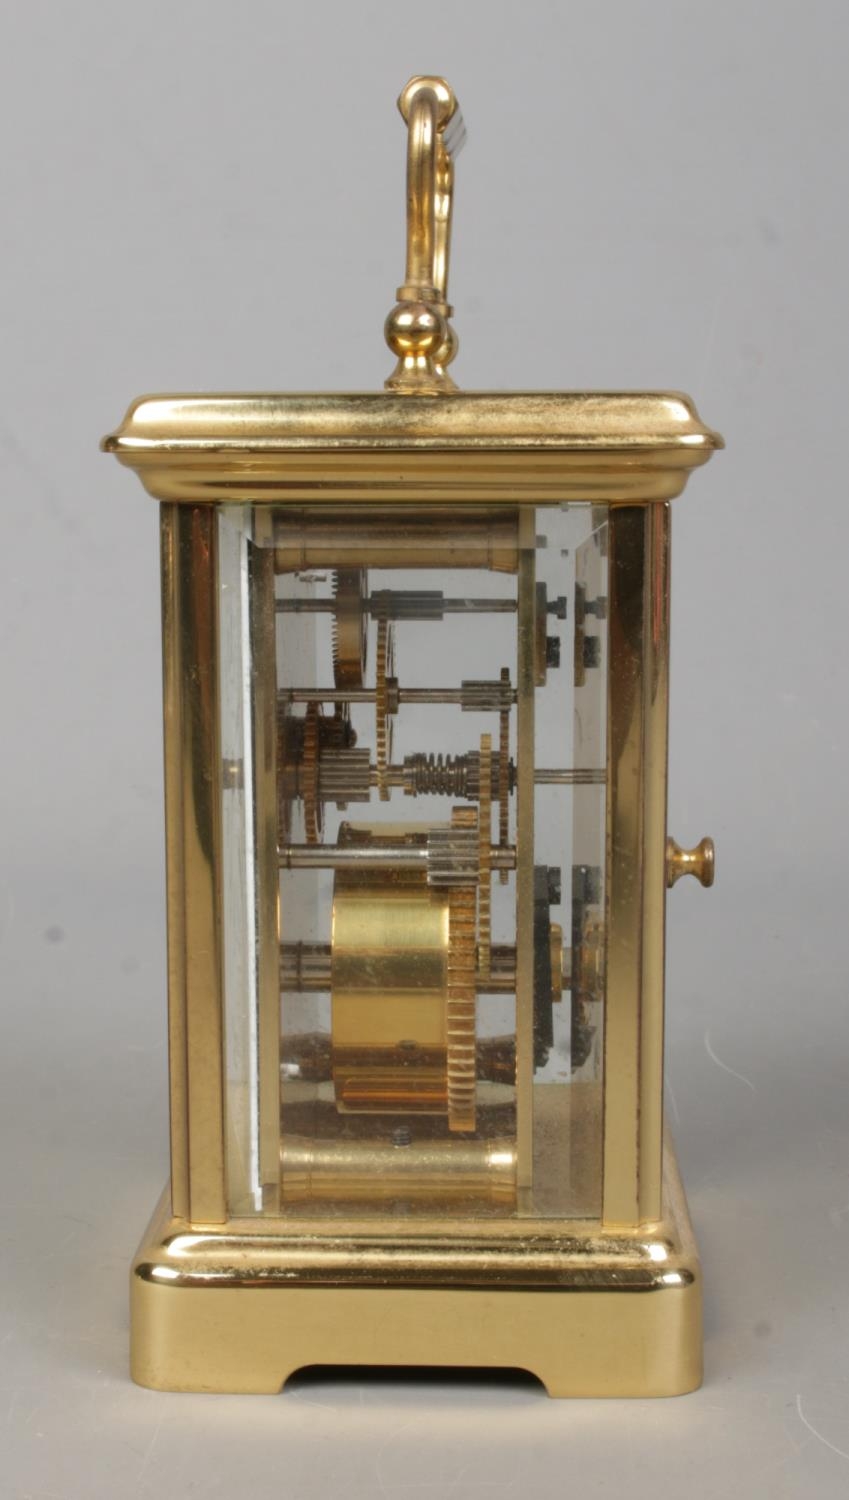 A Bornand Freres, Bichester carriage clock, with beveled glass panels and open top escapement. No - Image 2 of 2